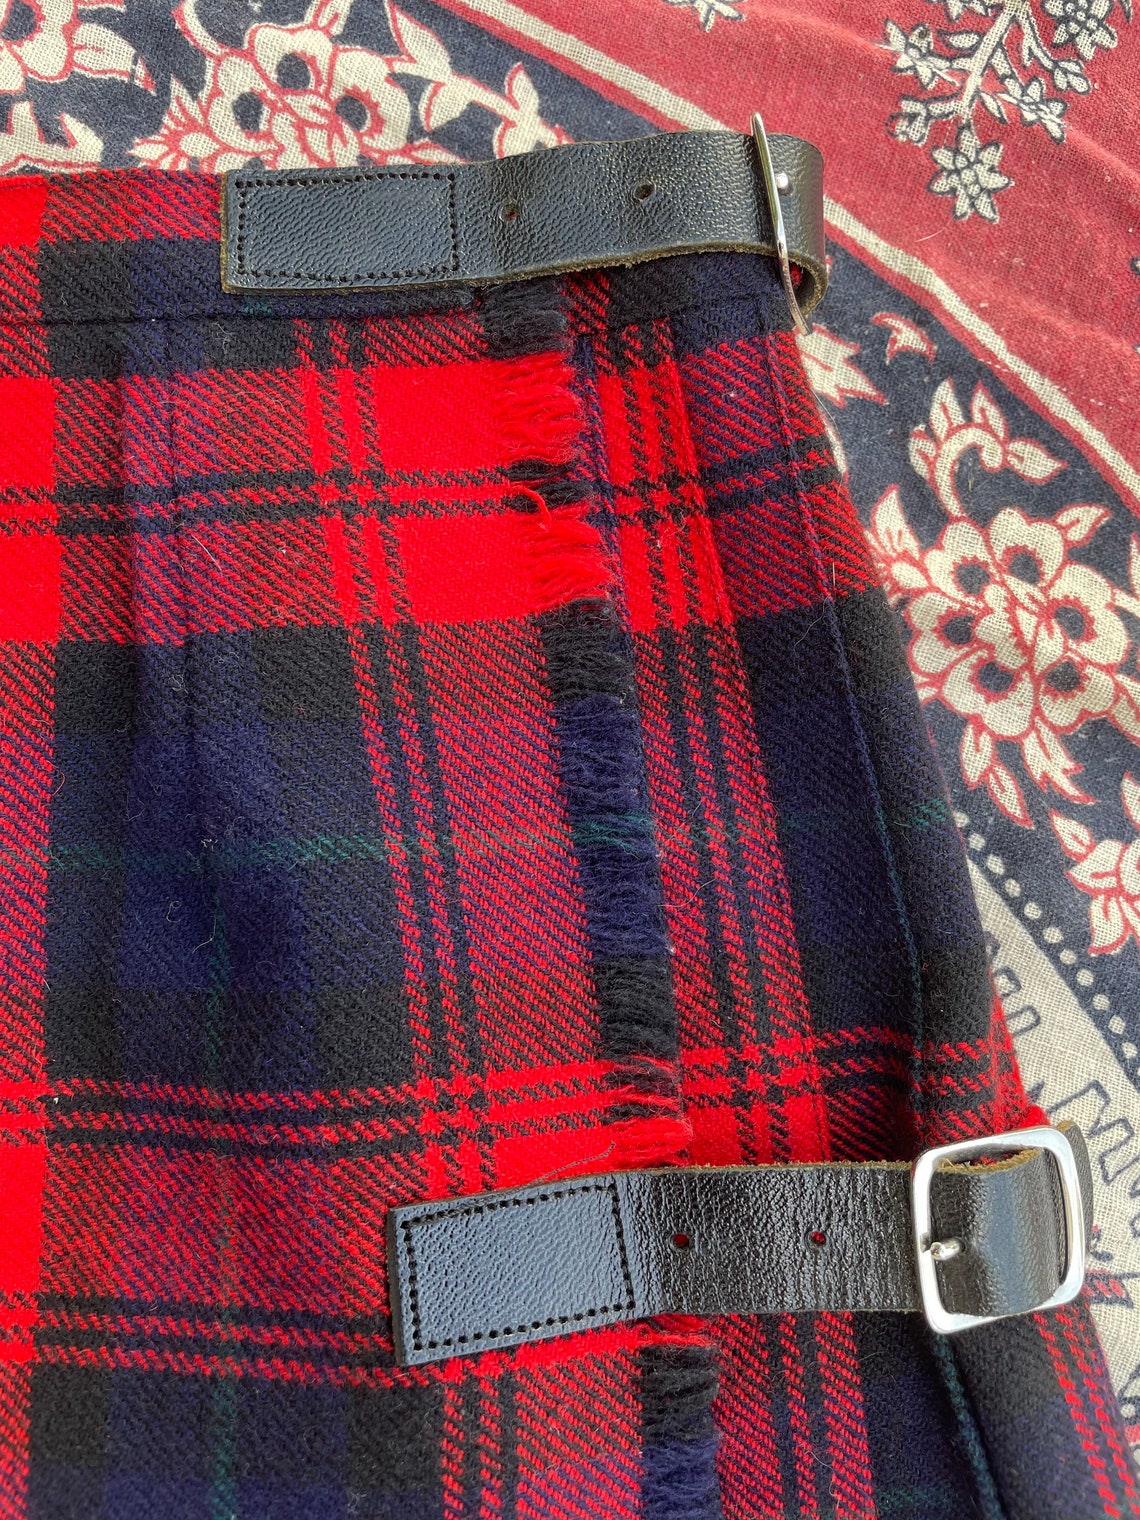 Vintage Archie Brown & Son of Bermuda kilt navy blue and red | Etsy